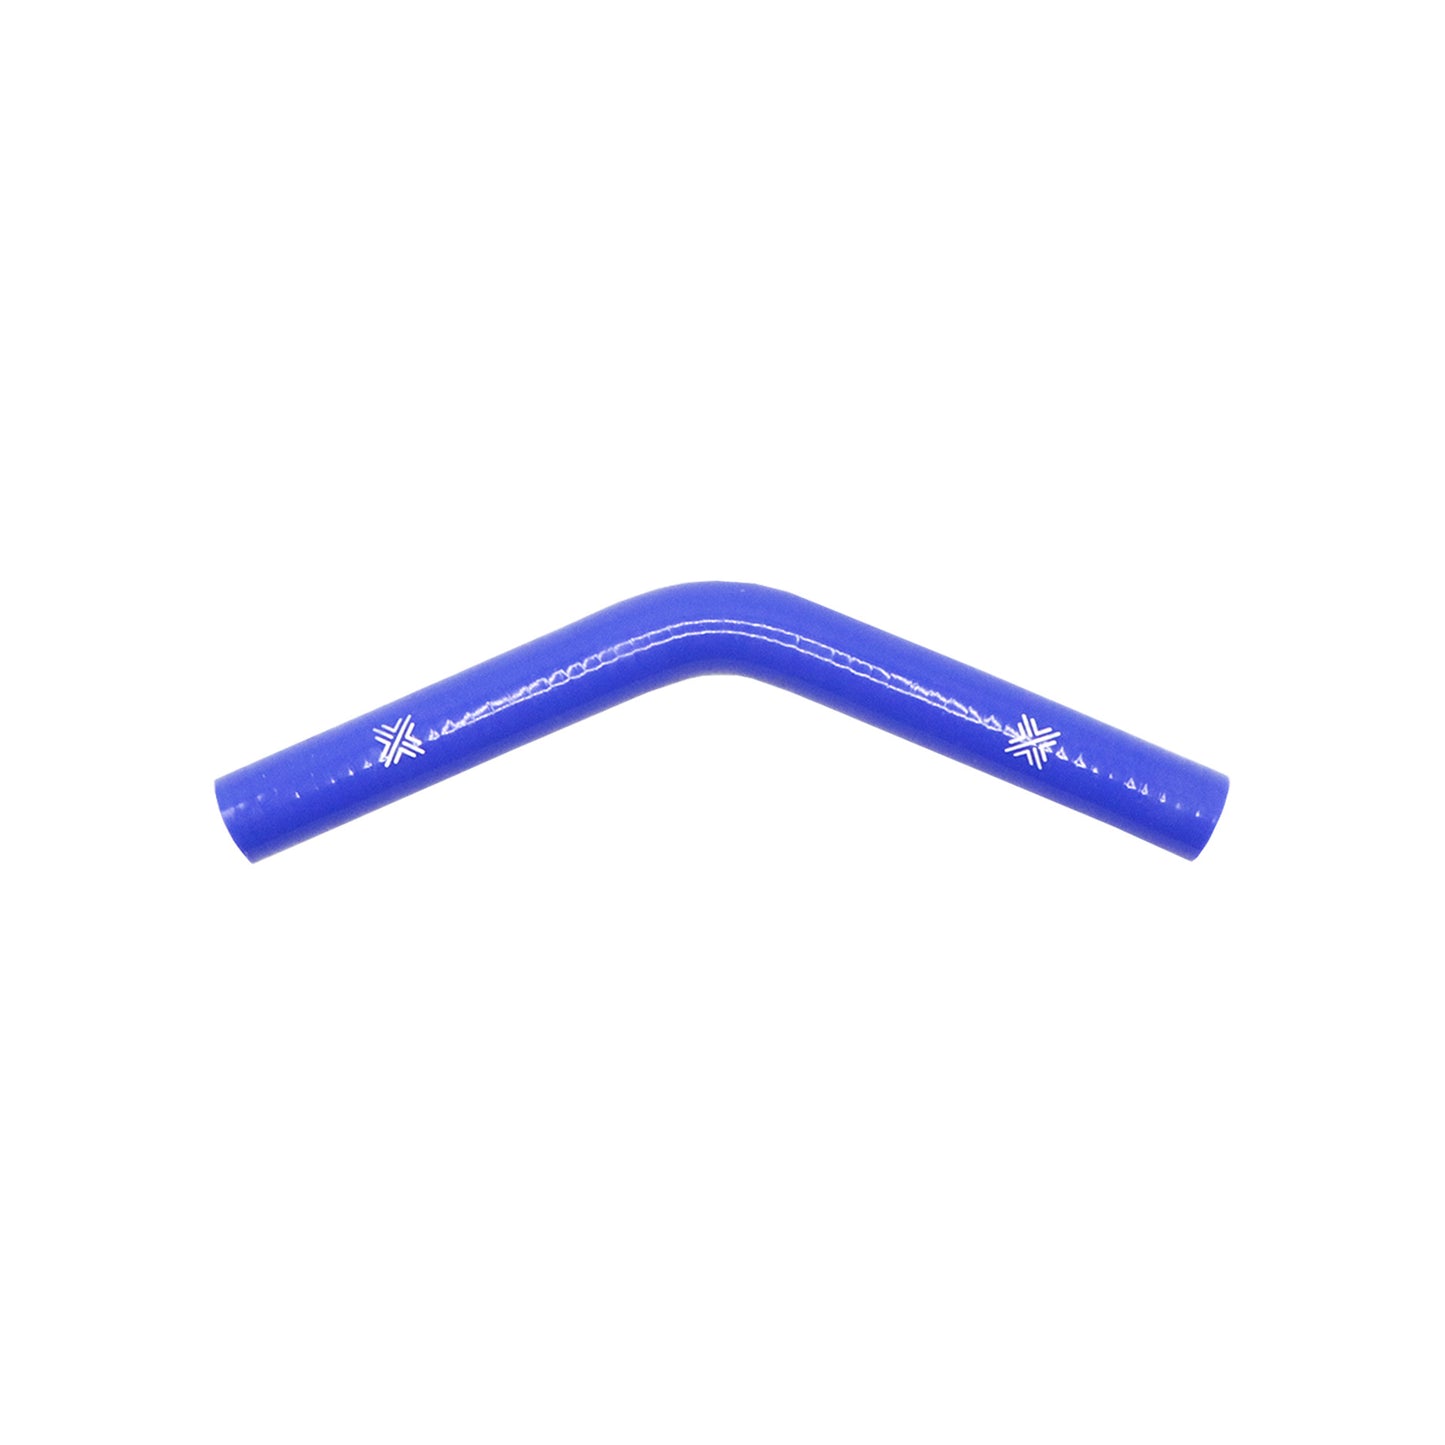 Pipercross Blue 45° 19mm Bore, 152mm Leg Length Silicone Hose (FCL04019)